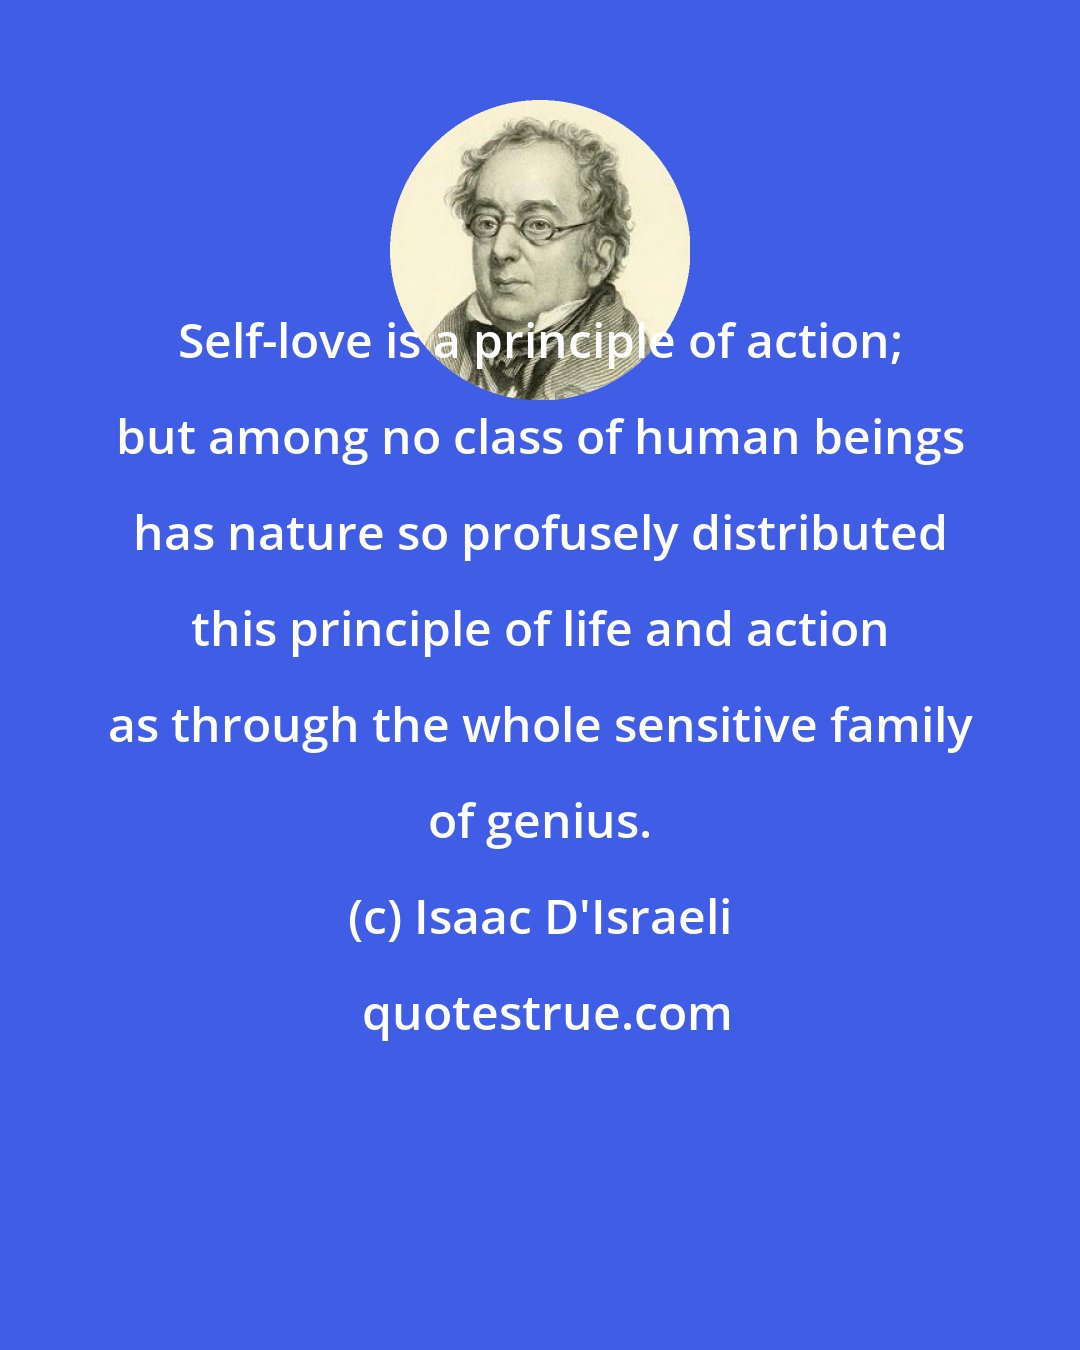 Isaac D'Israeli: Self-love is a principle of action; but among no class of human beings has nature so profusely distributed this principle of life and action as through the whole sensitive family of genius.